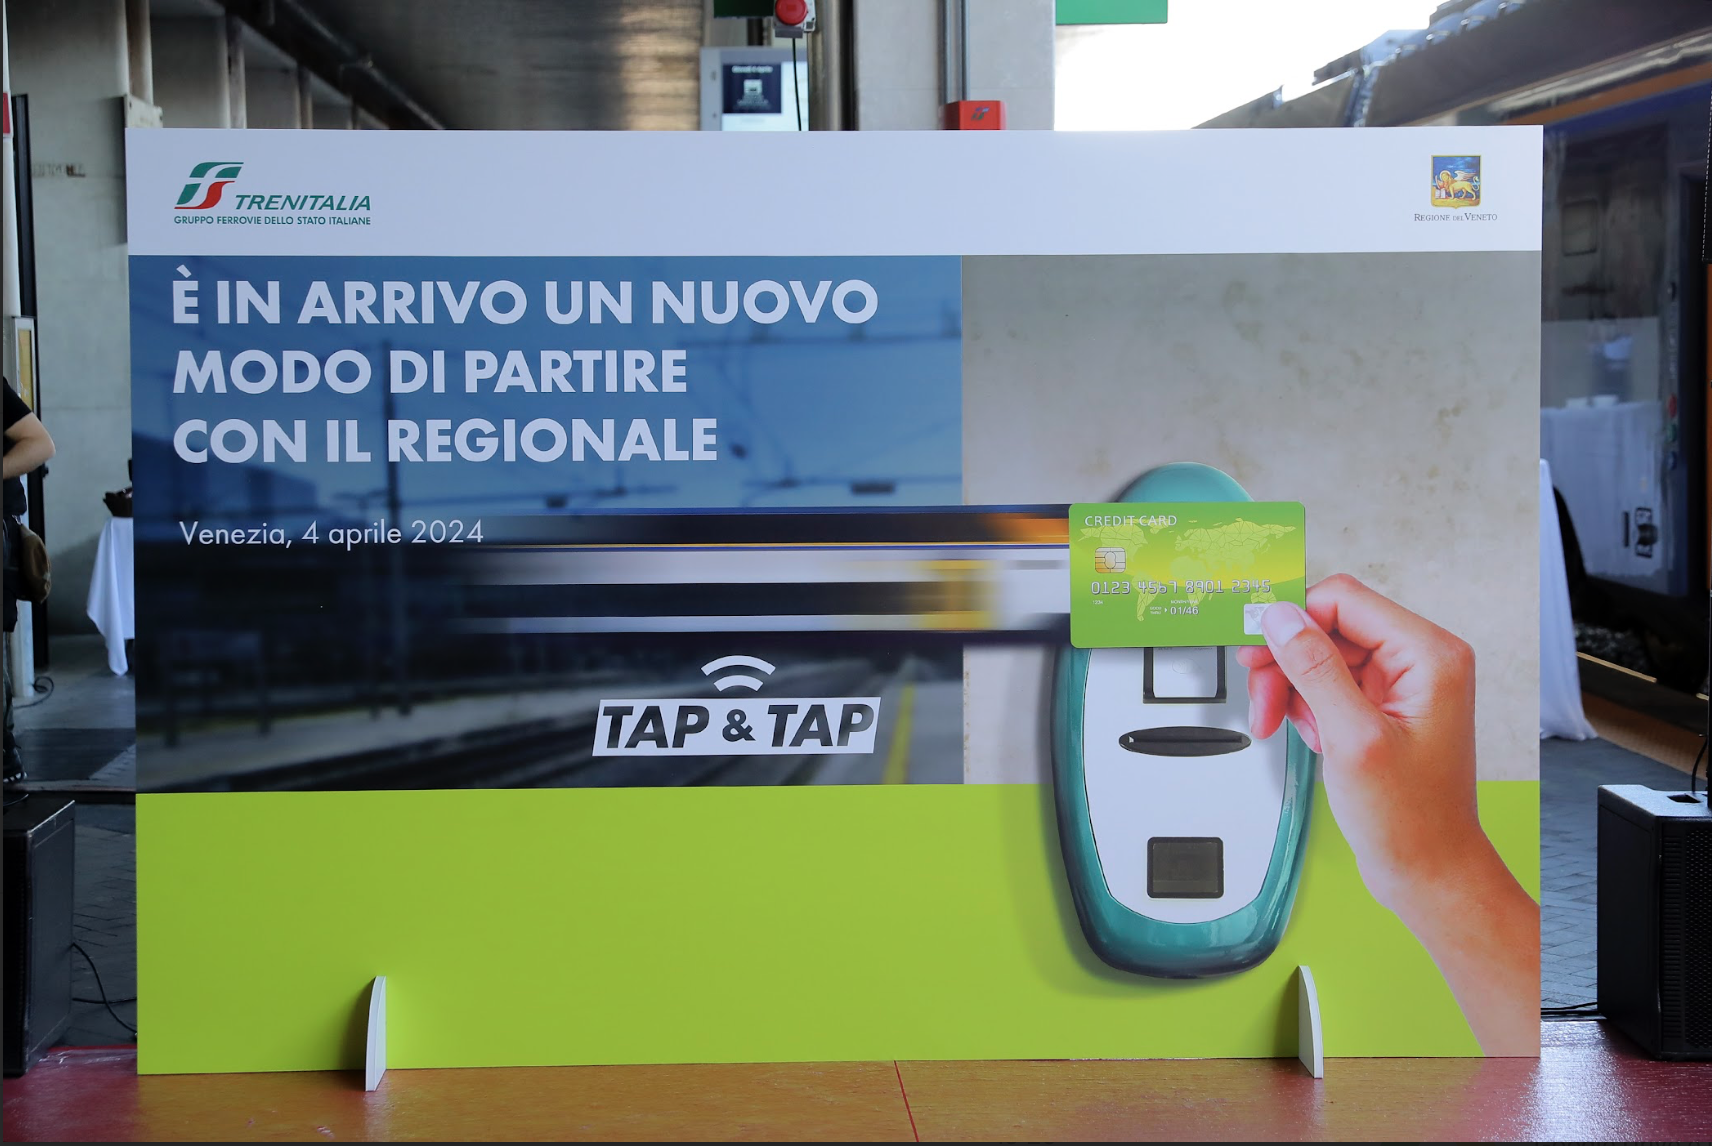 “tap&tap” New Ticket Purchasing System